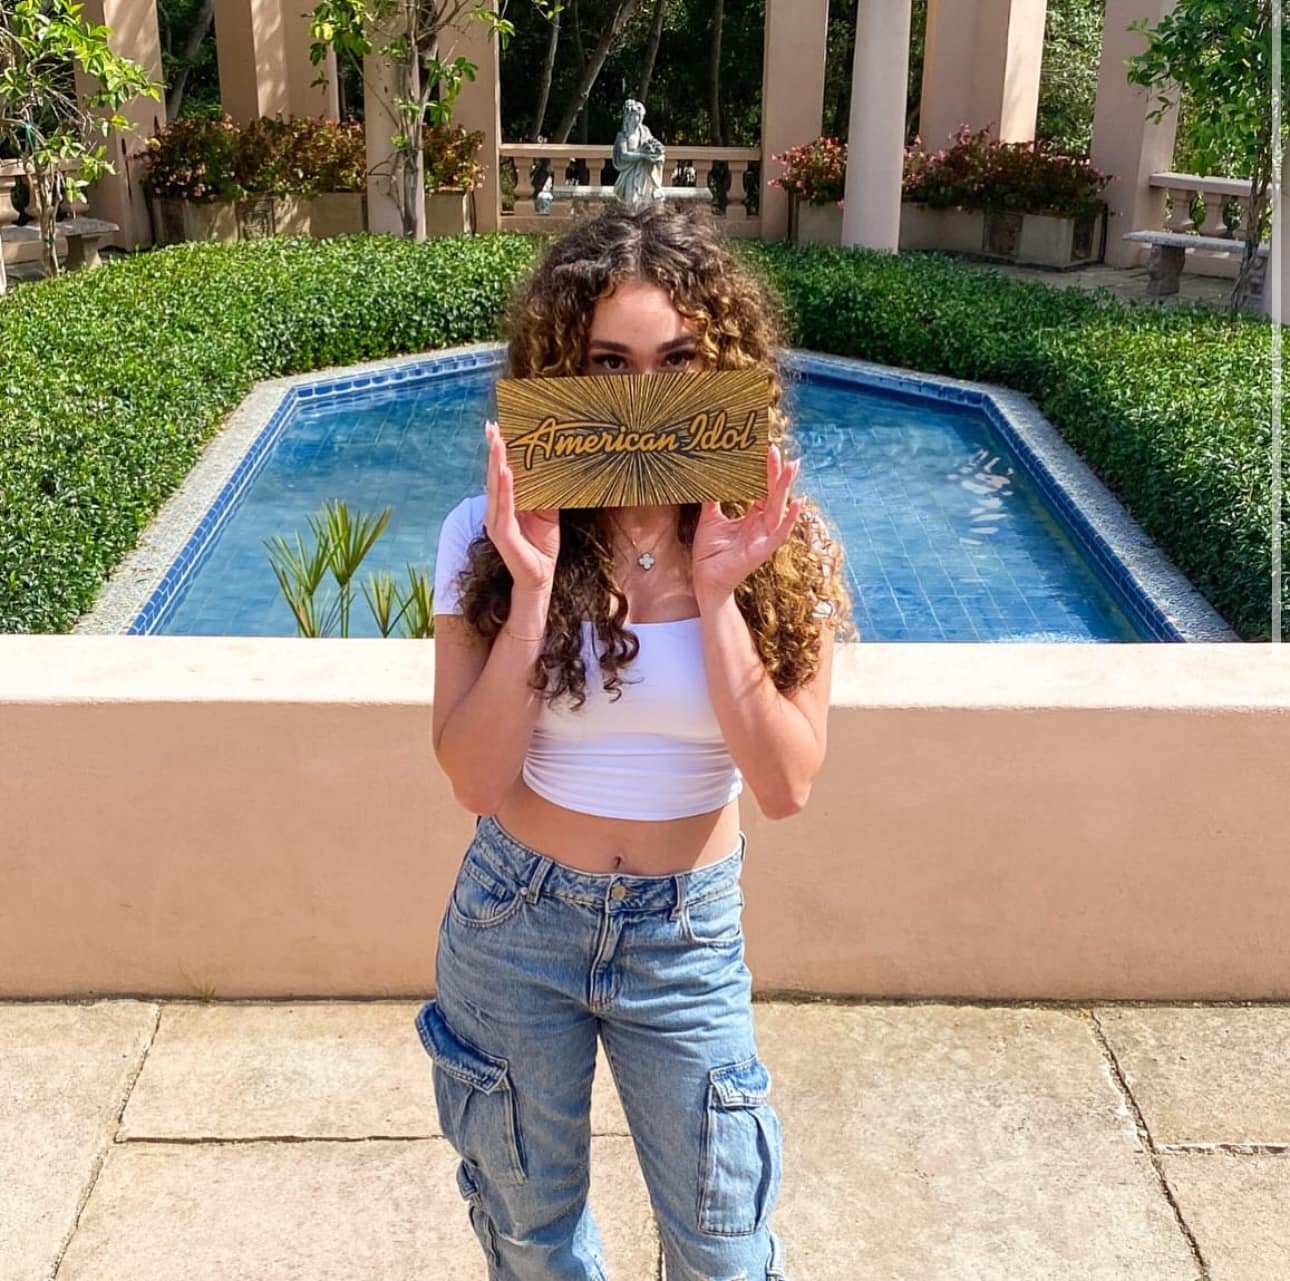 Former "Voice" finalist Hailey Mia earned a Golden Ticket to Hollywood after auditioning for "American Idol" with a cover of judge Katy Perry's song "Rise."